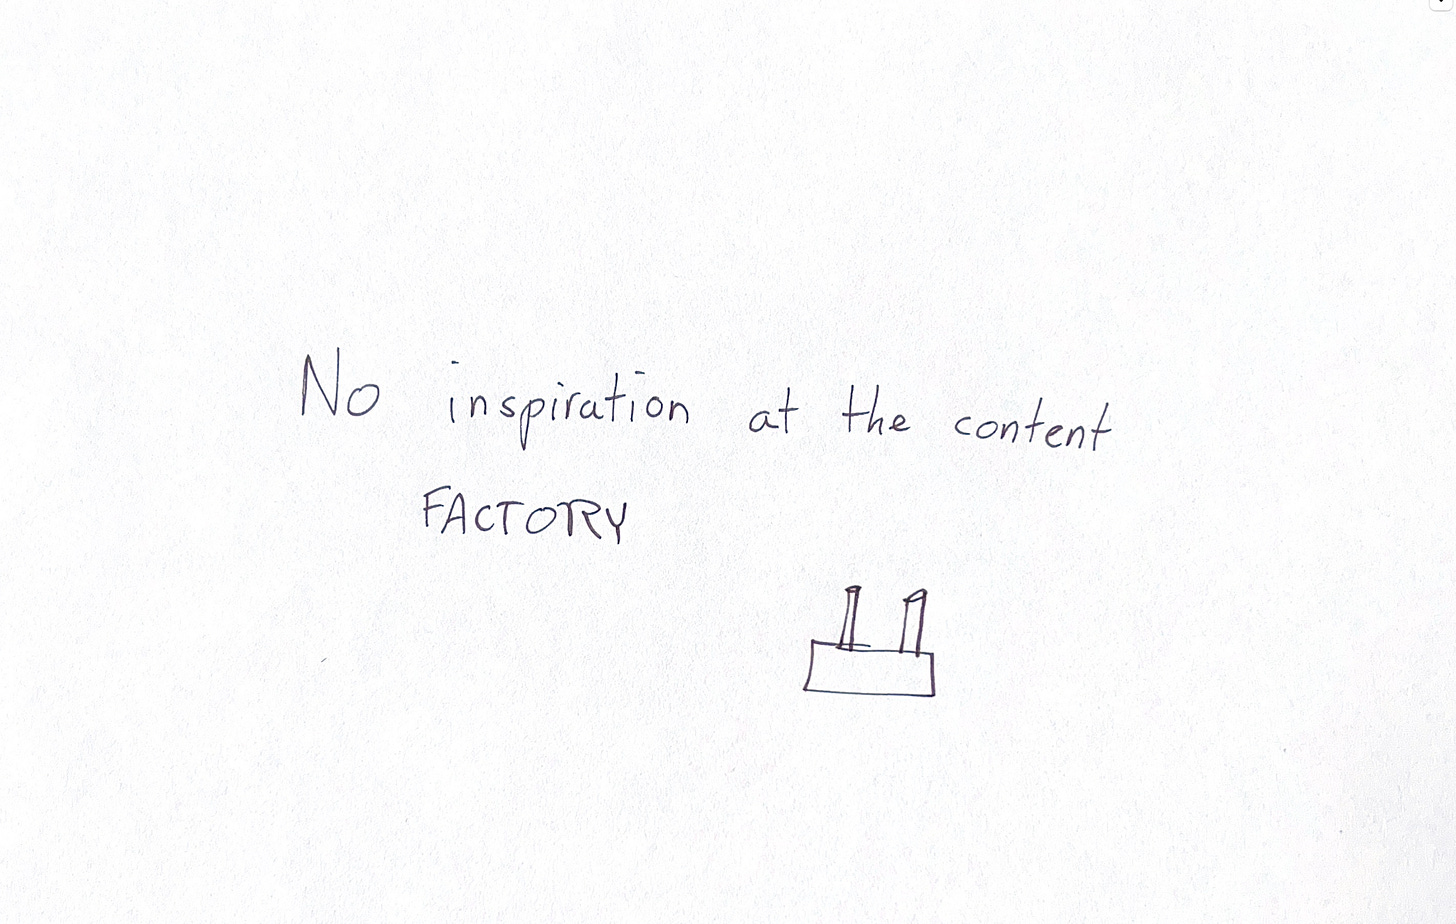 No inspiration at the content factory